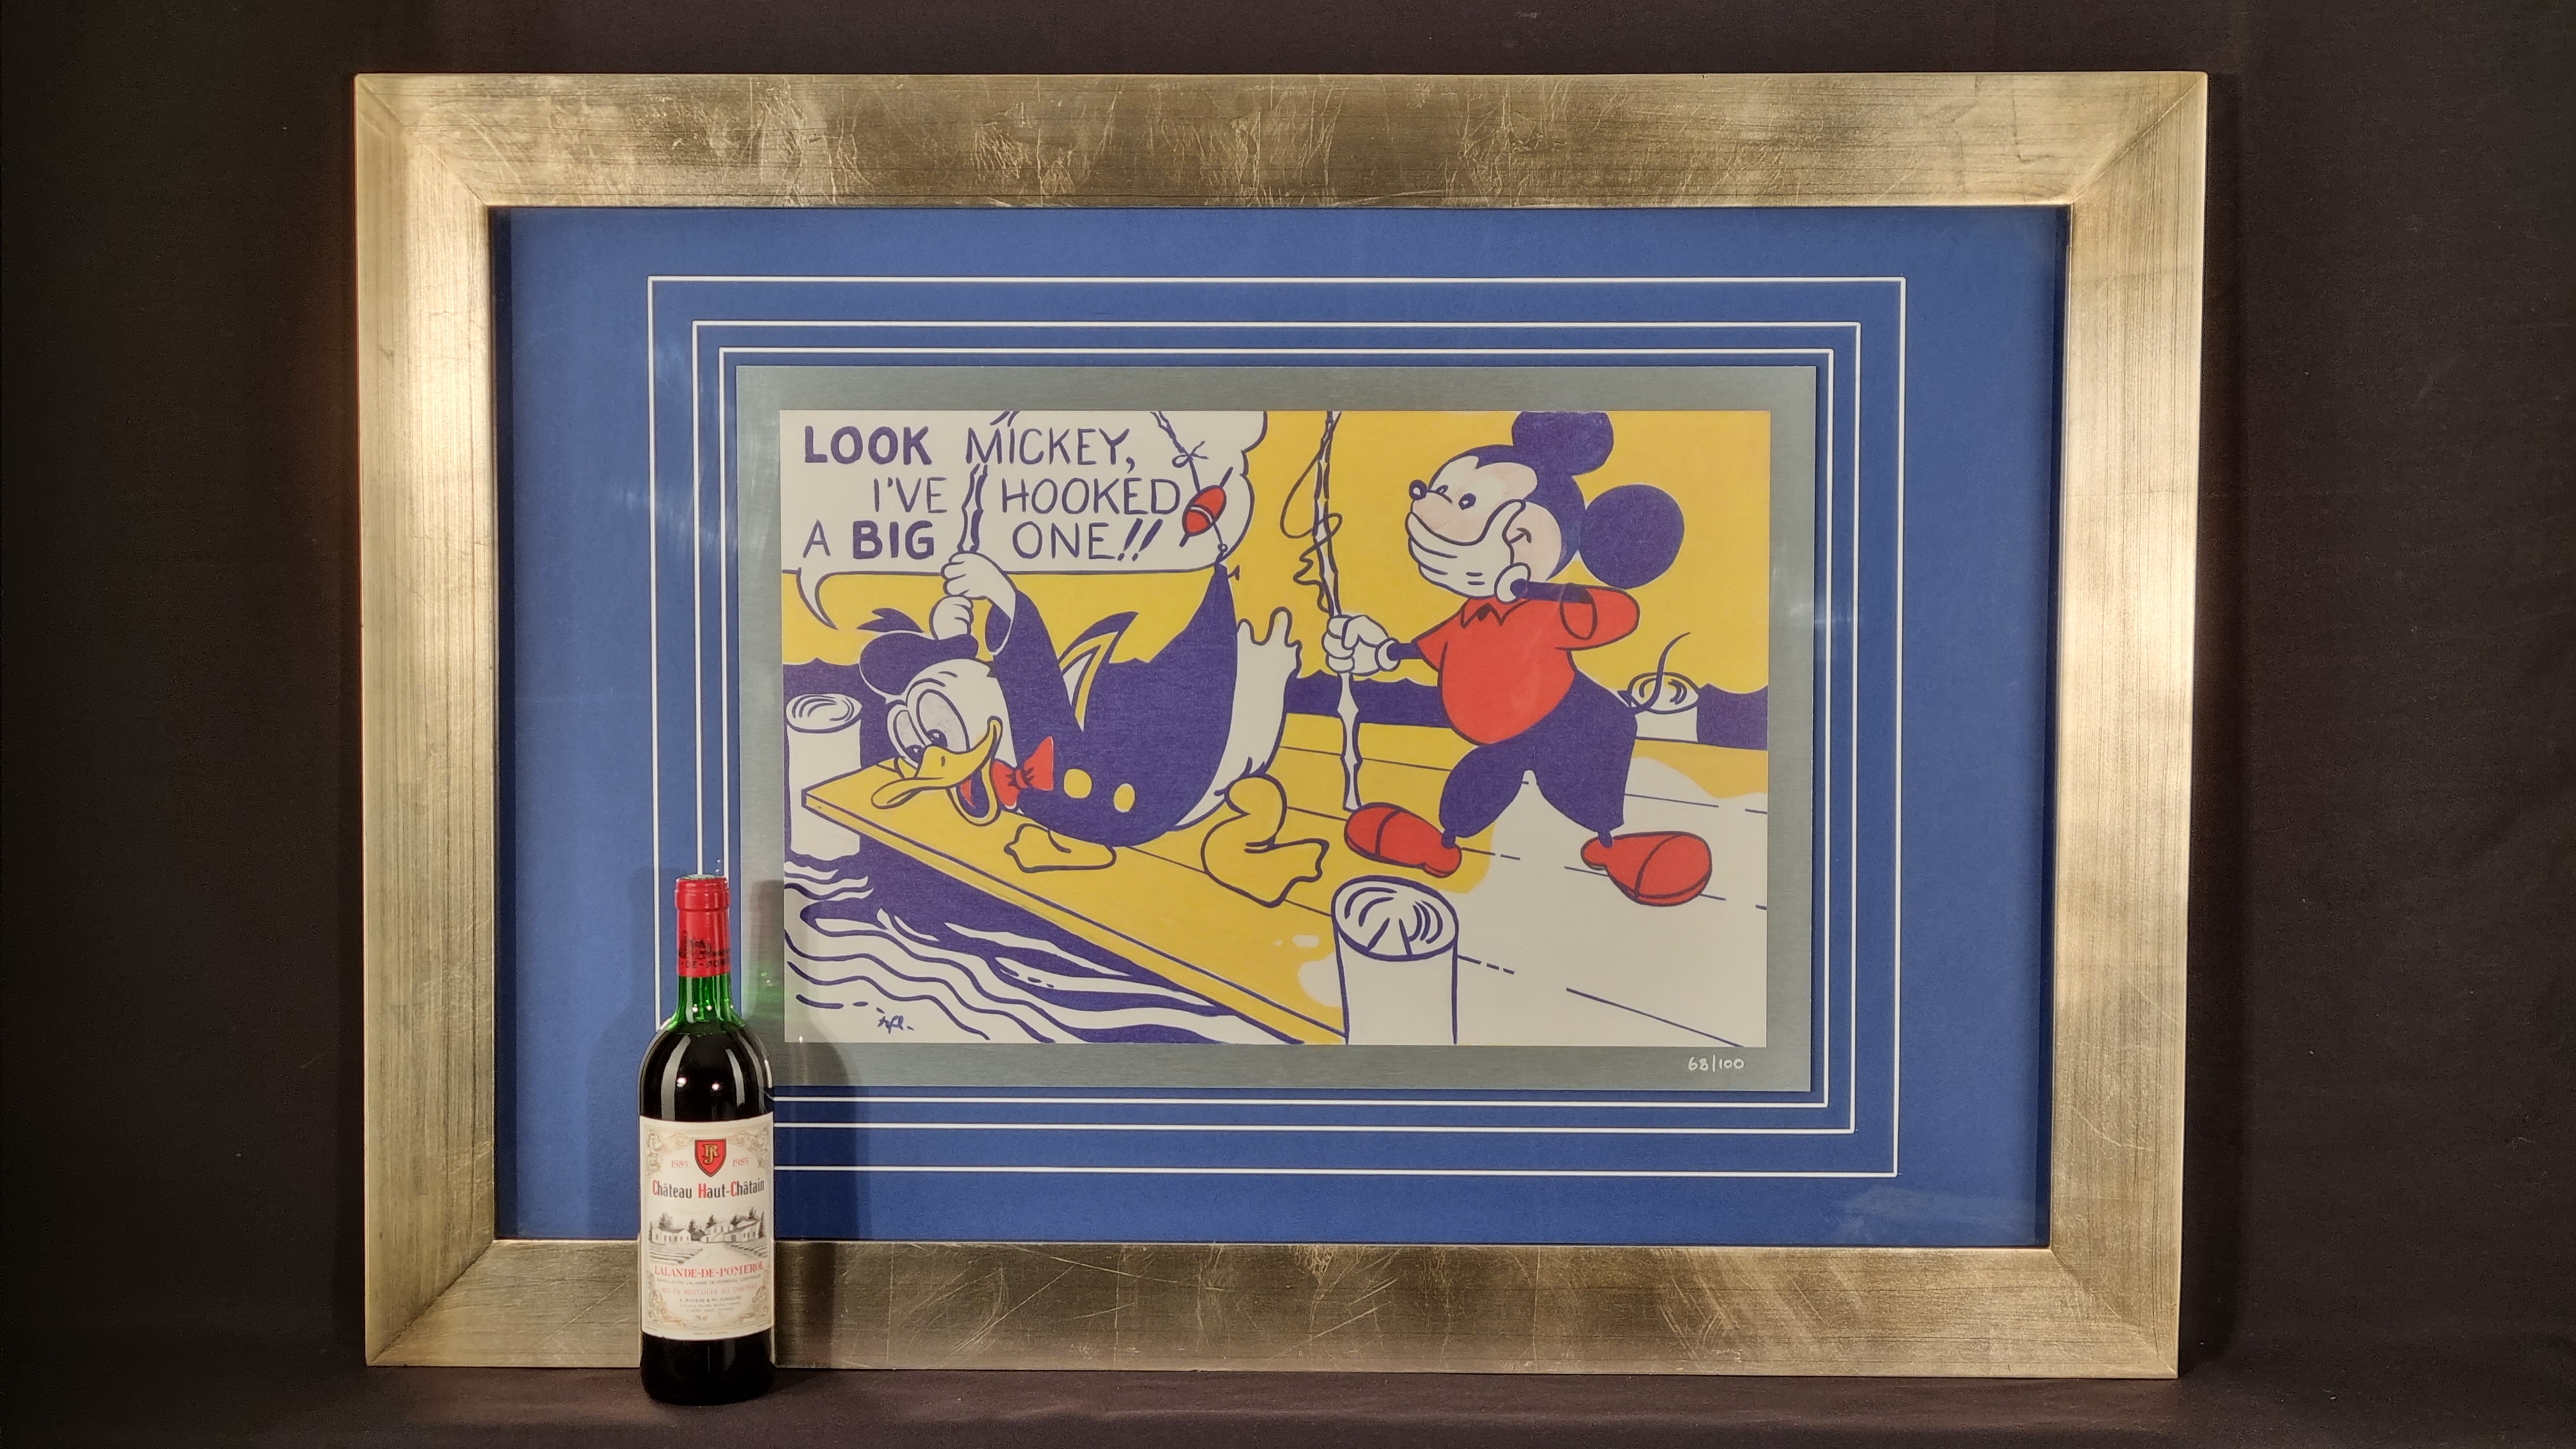 Rare Roy Lichtenstein "Look Mickey, 1961" Limited Edition on Metal. - Image 2 of 9